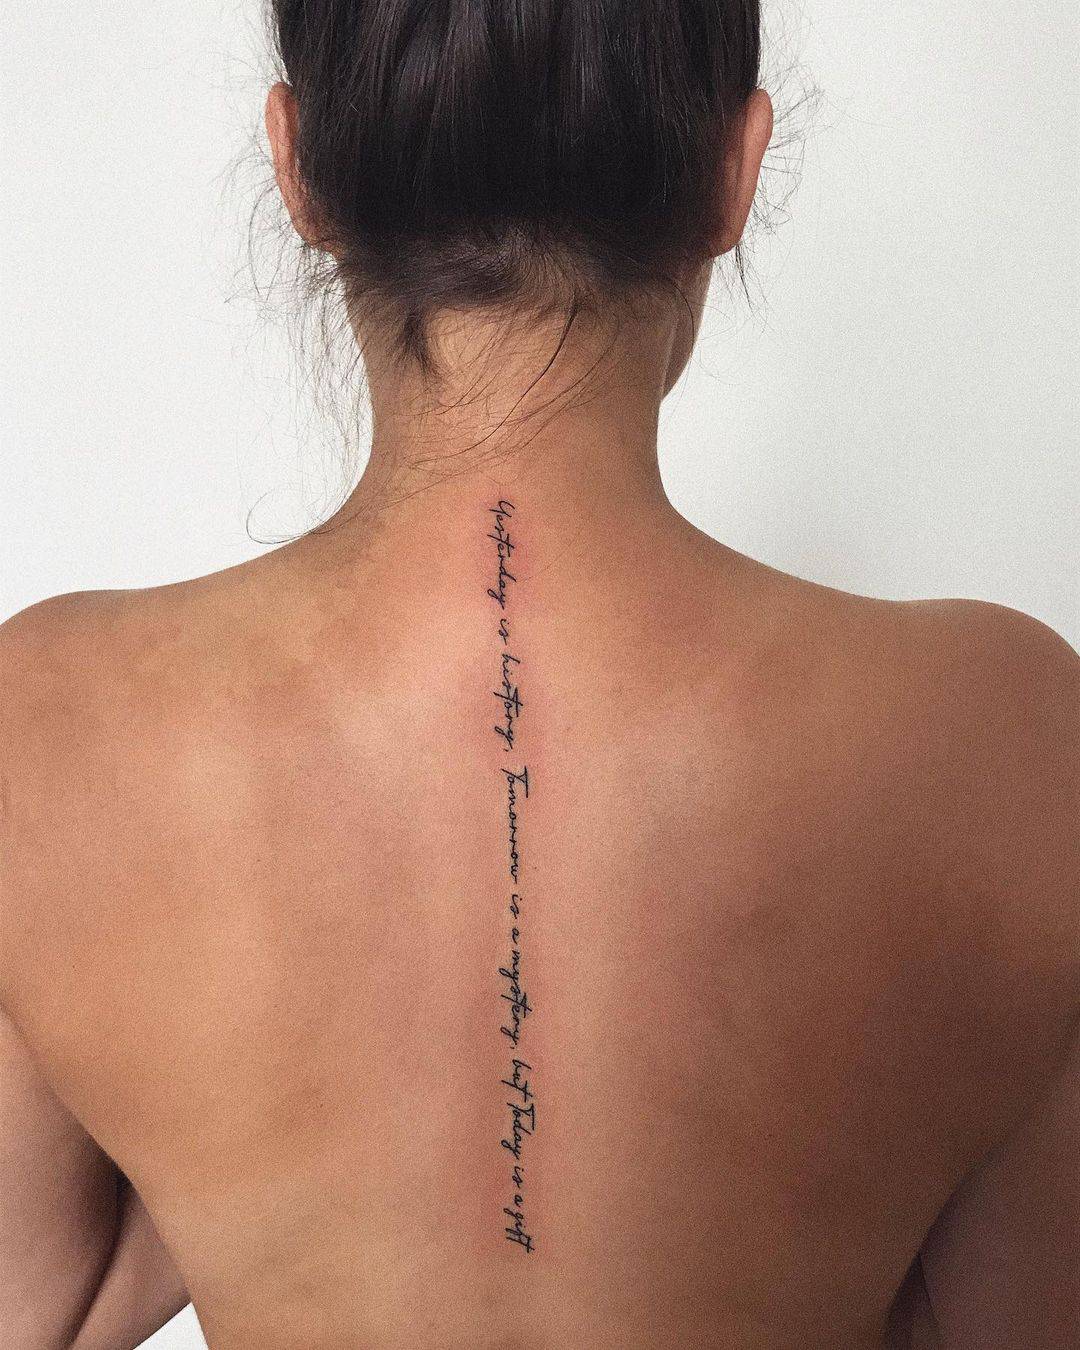 long message tattoo on back